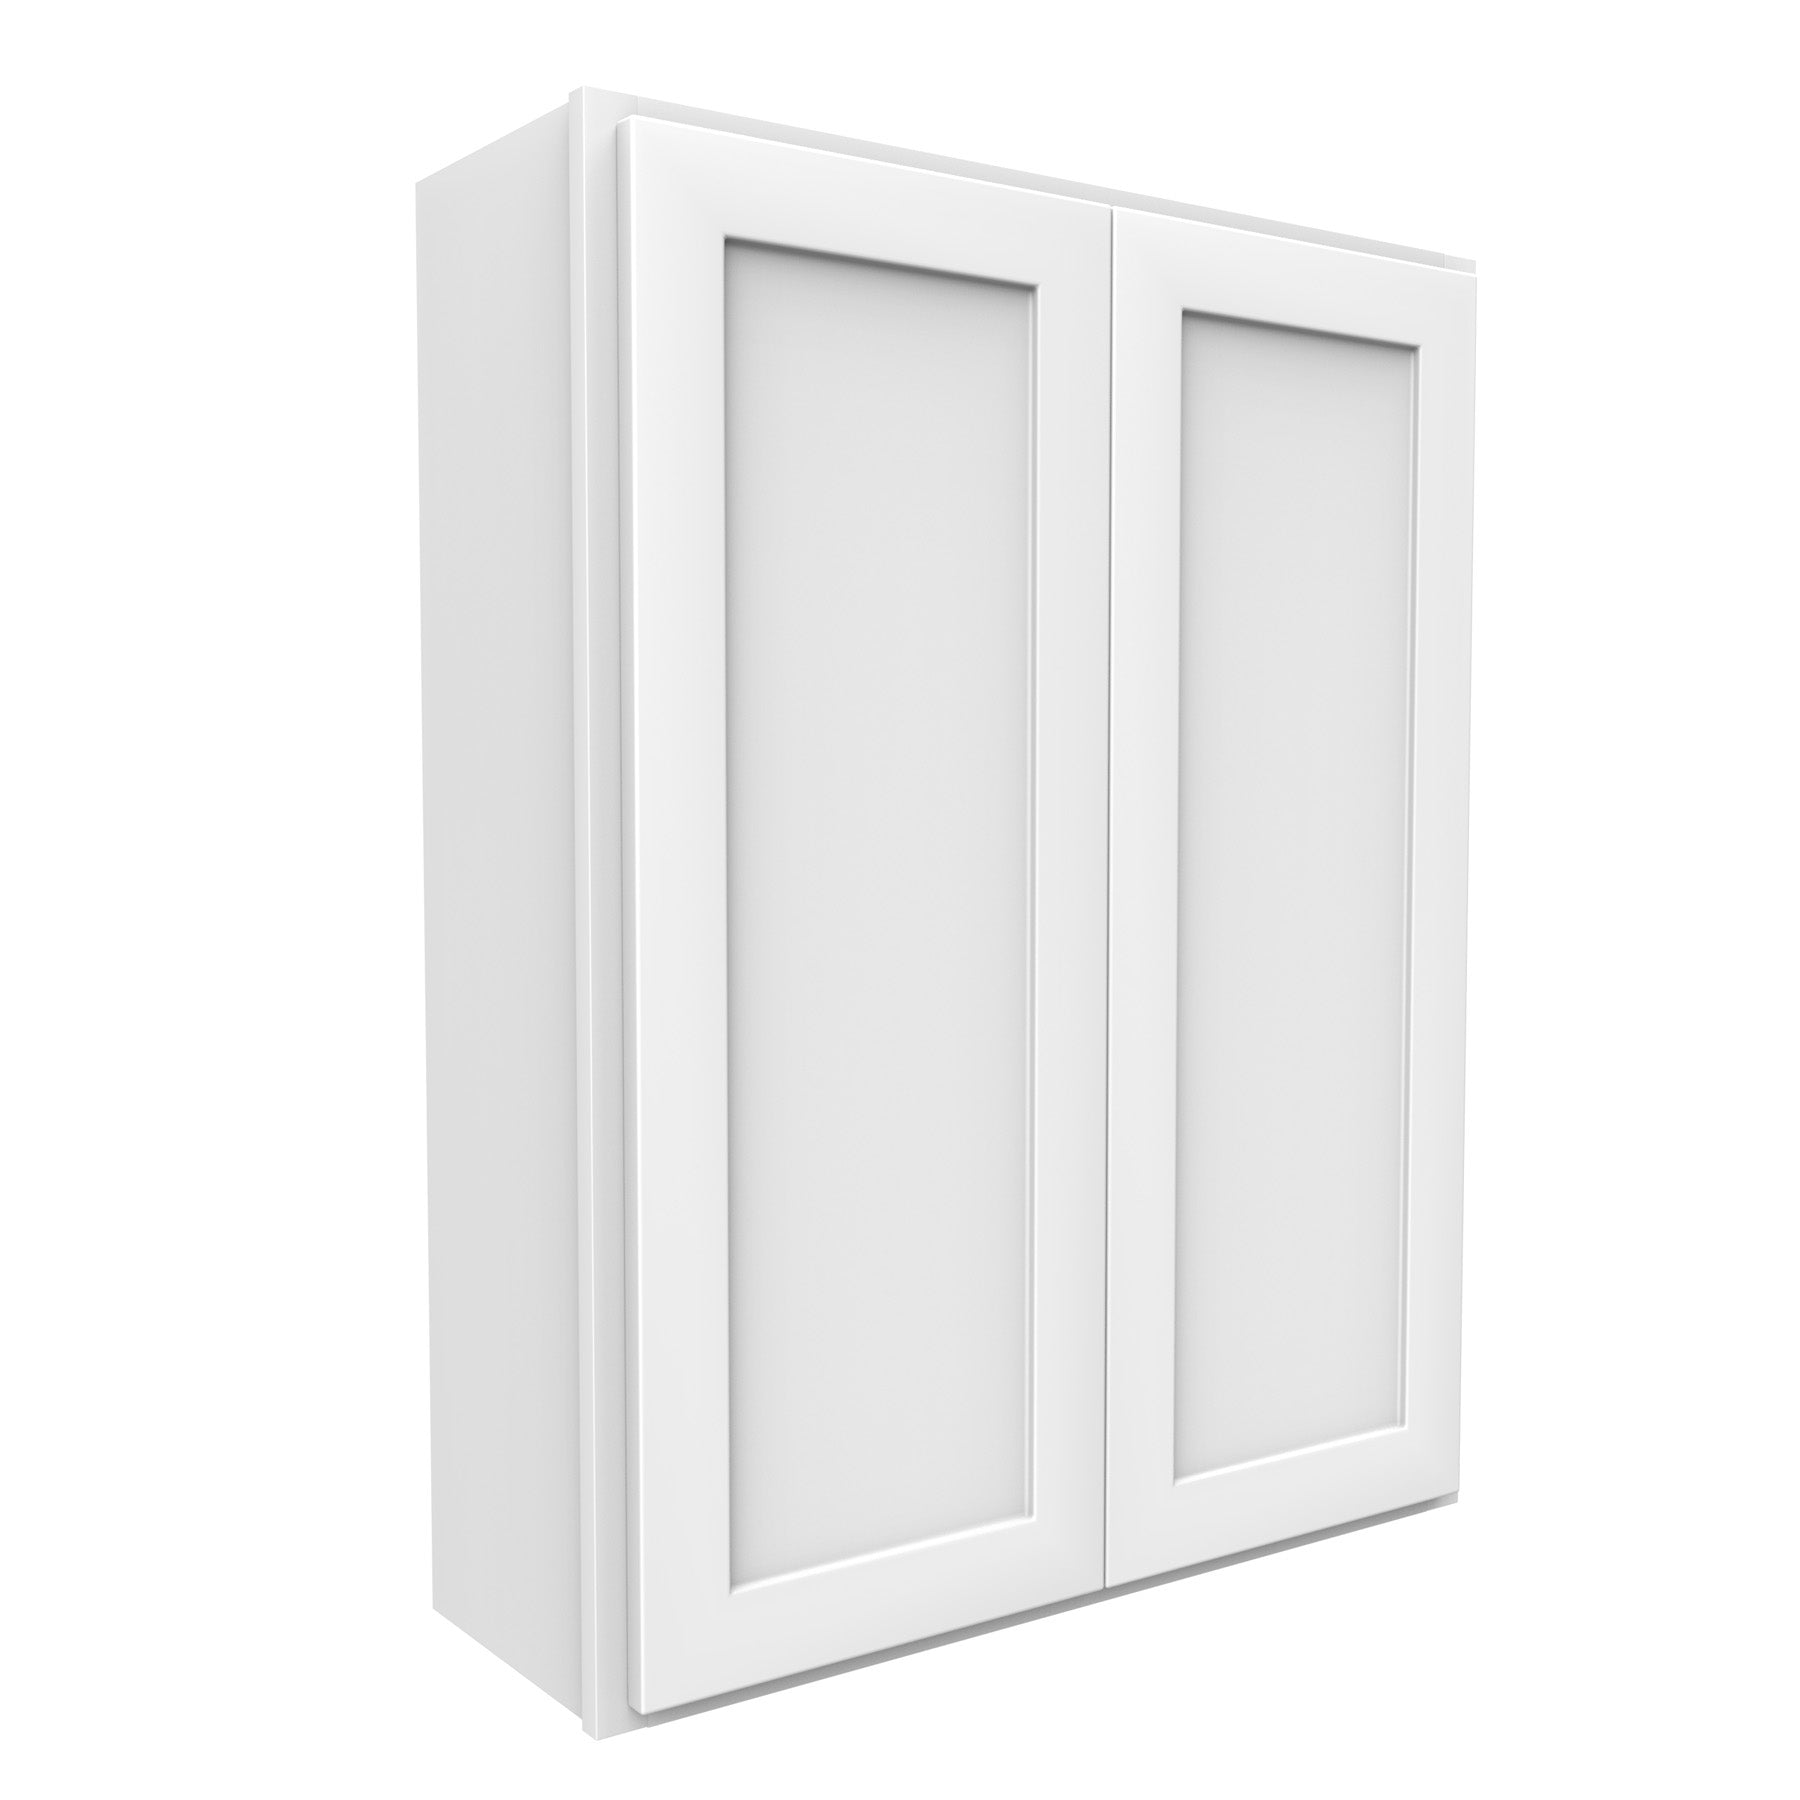 42 Inch High Double Door Wall Cabinet - Luxor White Shaker - Ready To